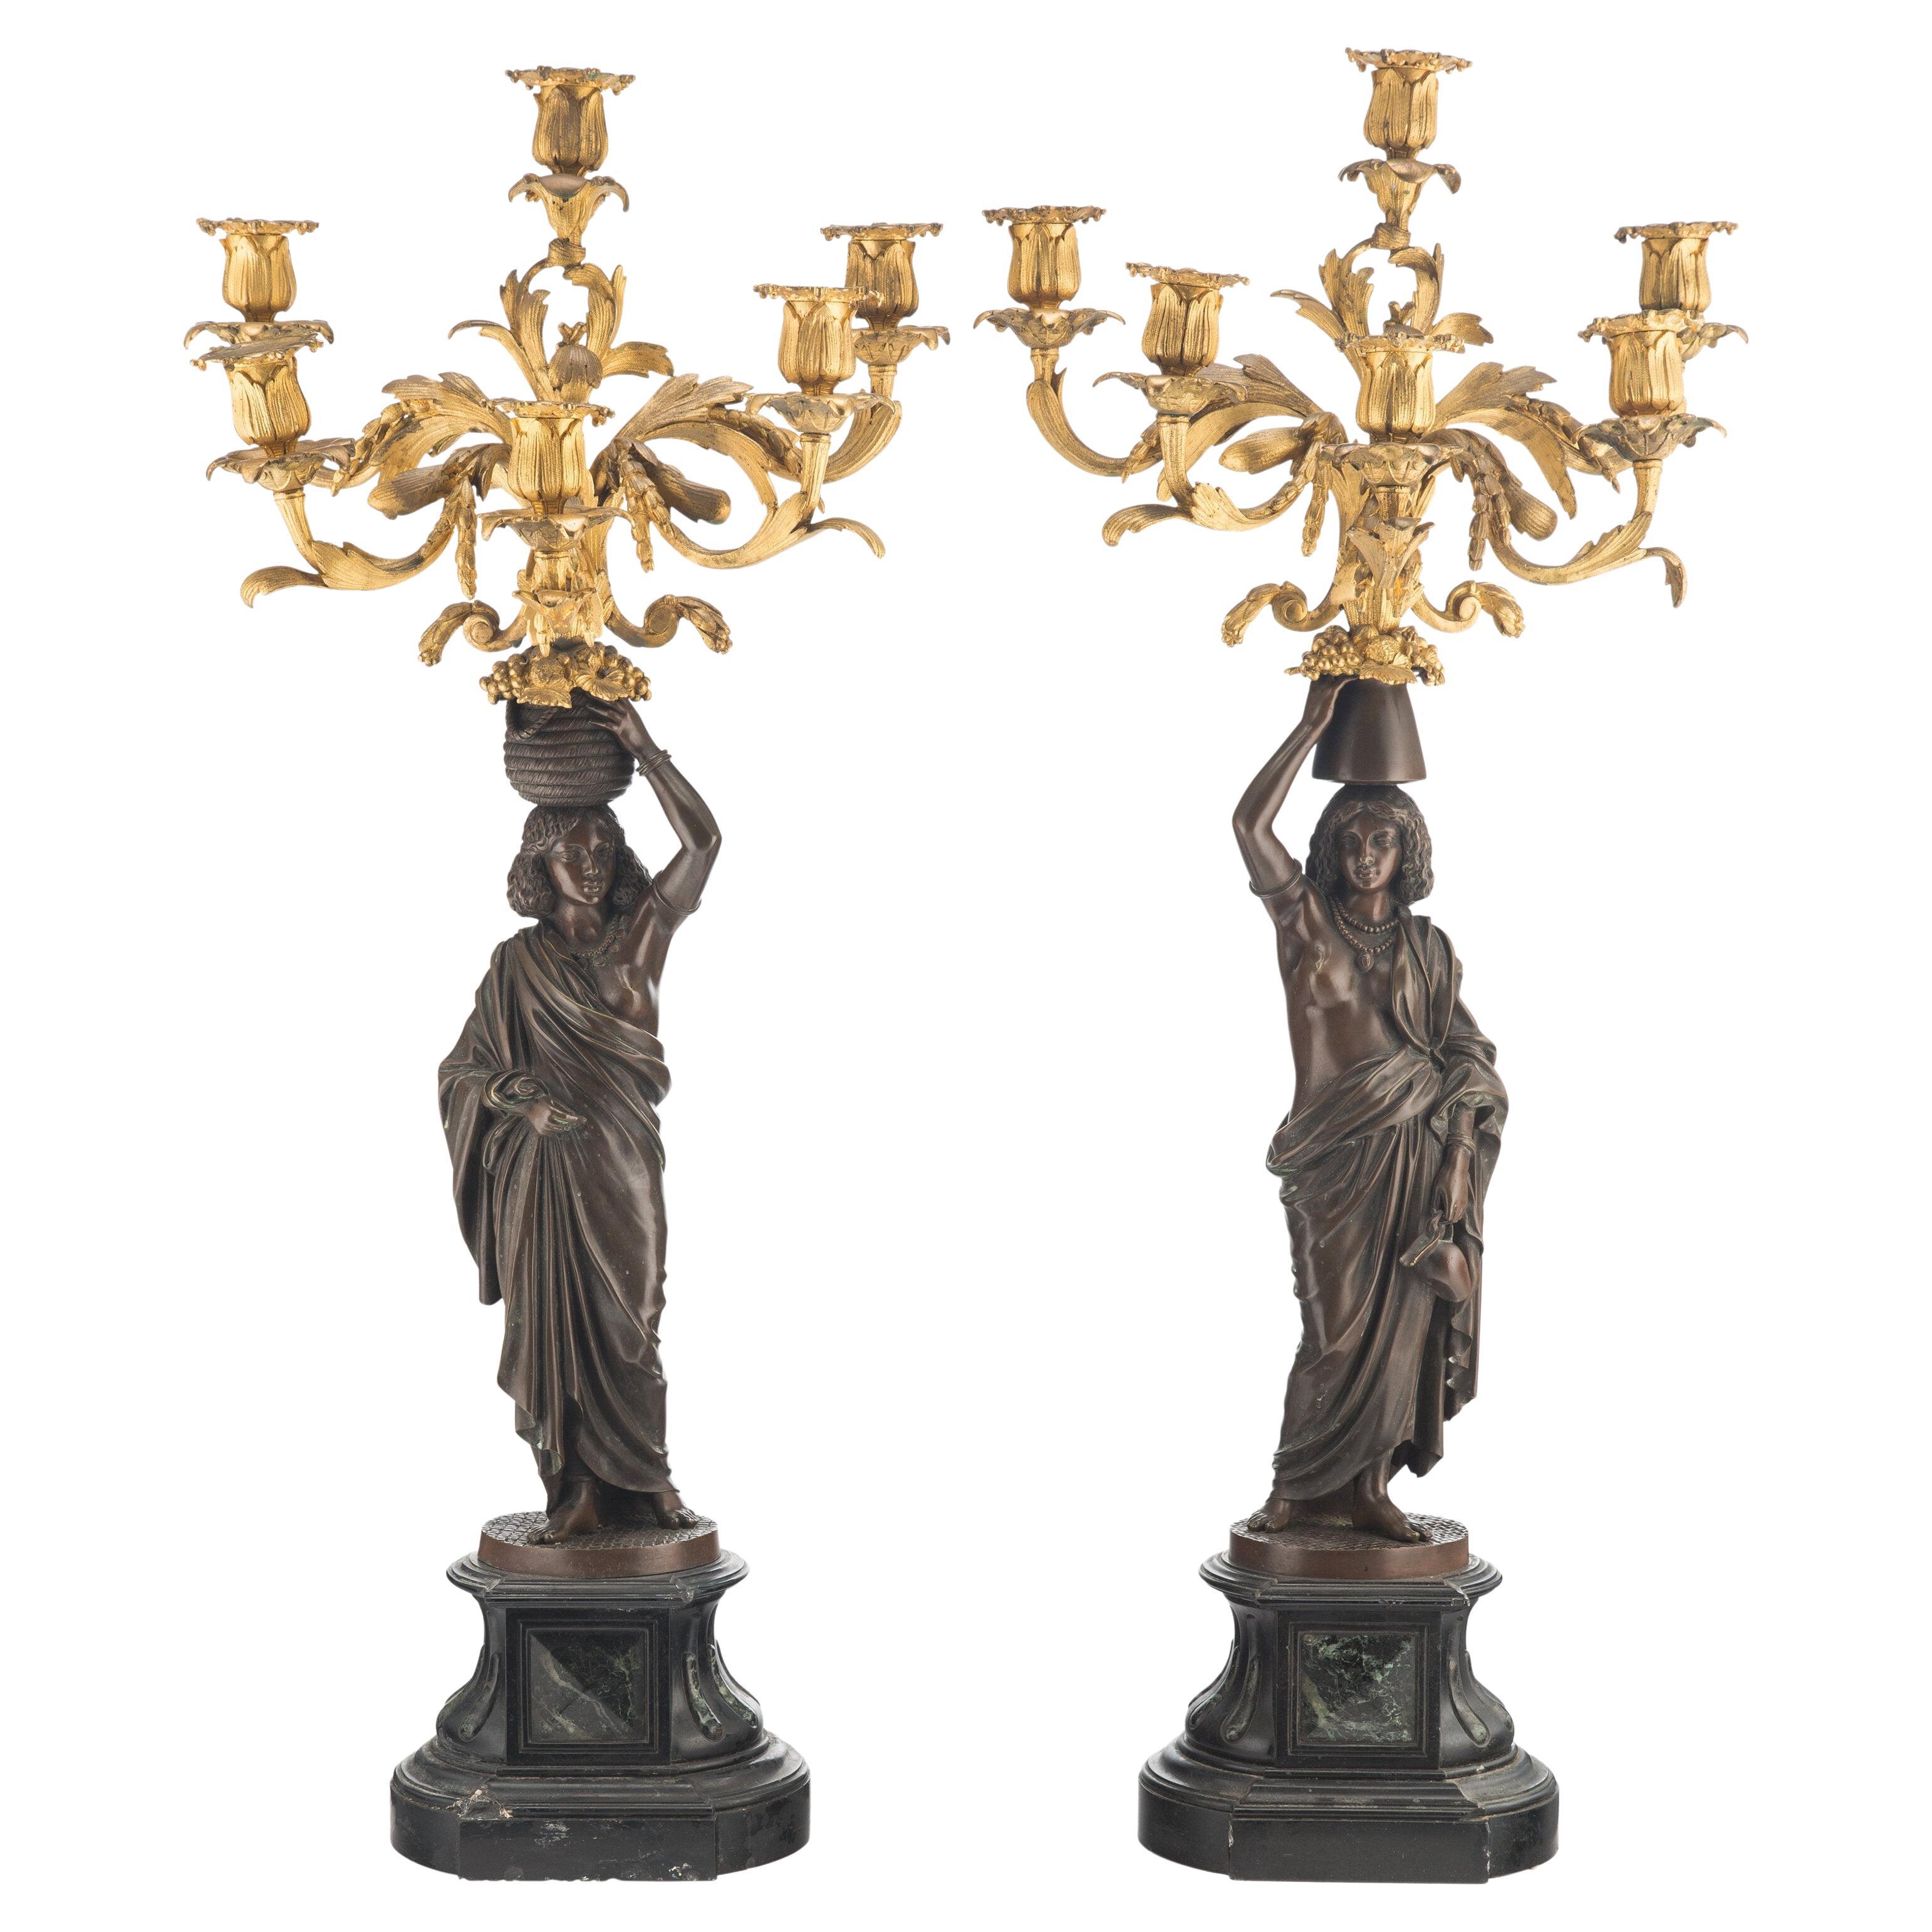 Pair Exotic French 19th Century Figural Gilt and Patinated Bronze Candelabras